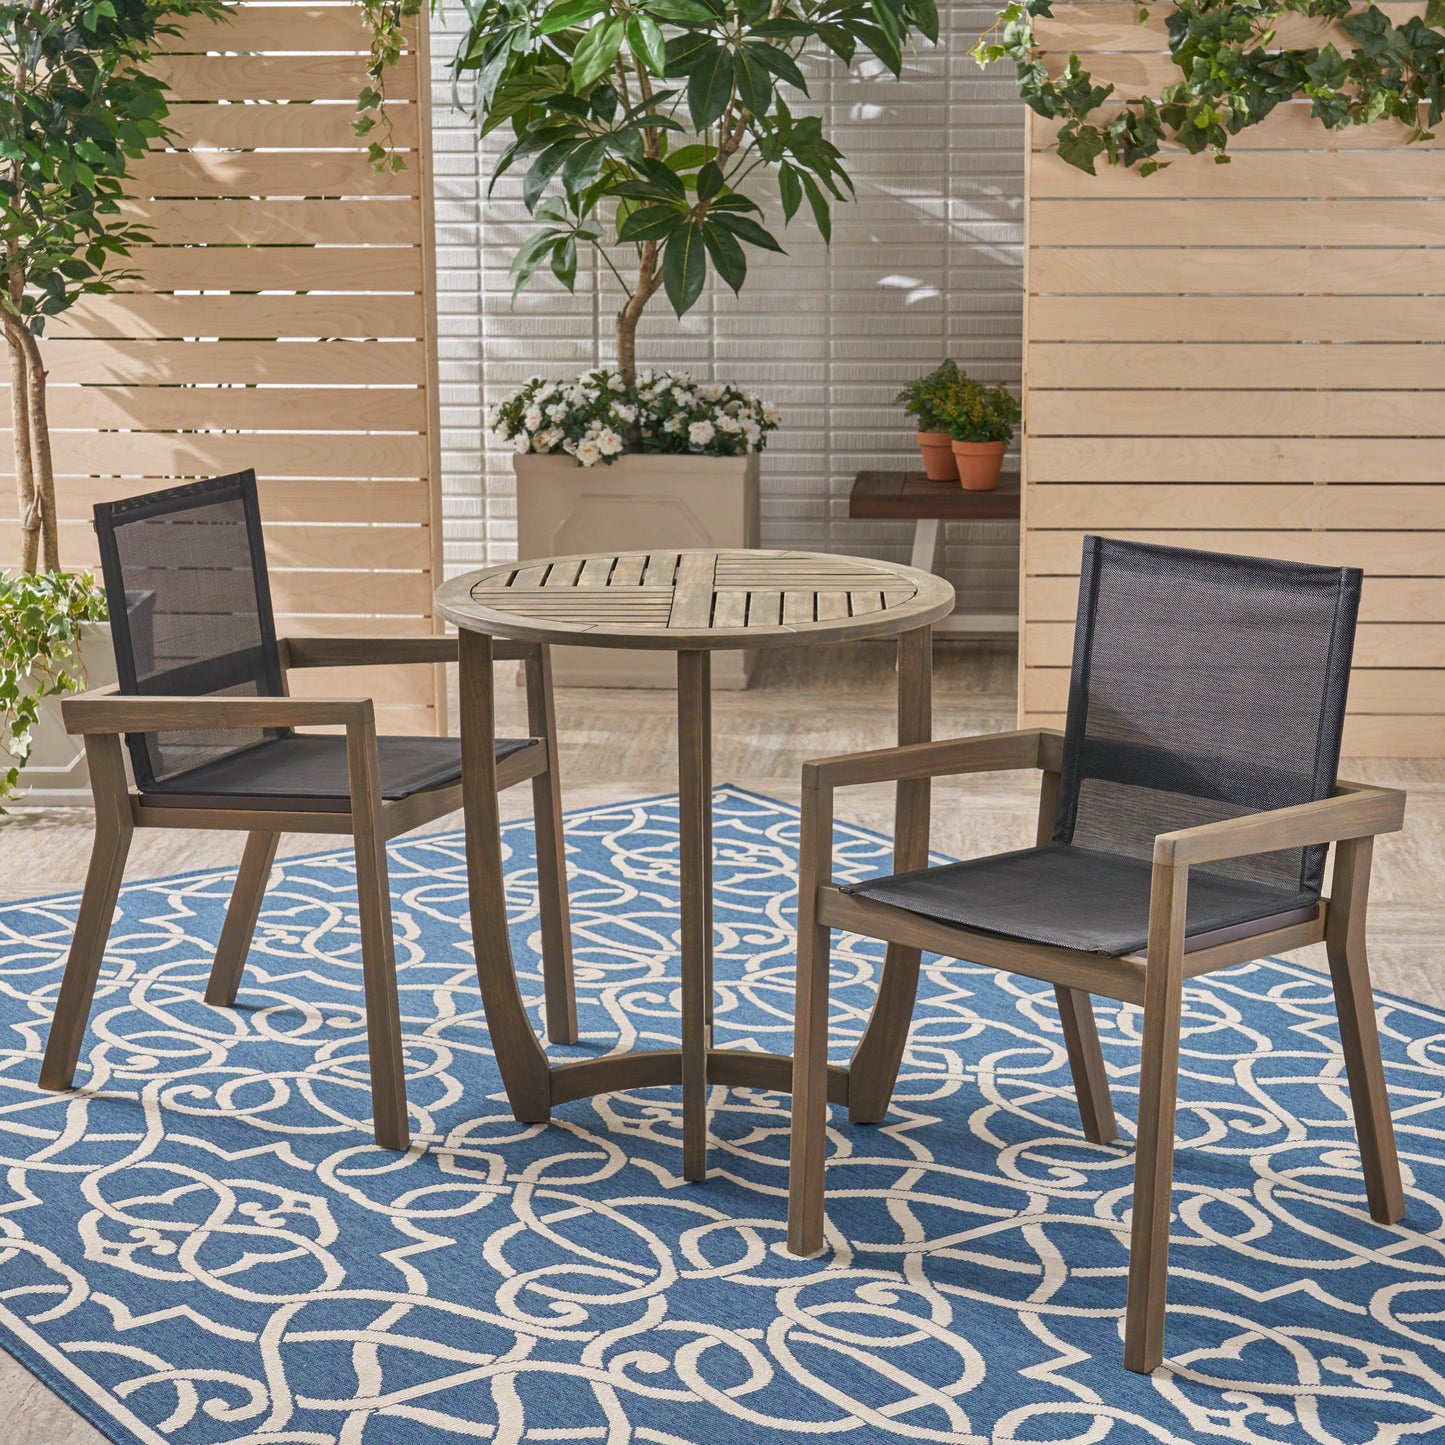 Marcell Outdoor Acacia Wood 3 Piece Dining Set with Mesh Seats